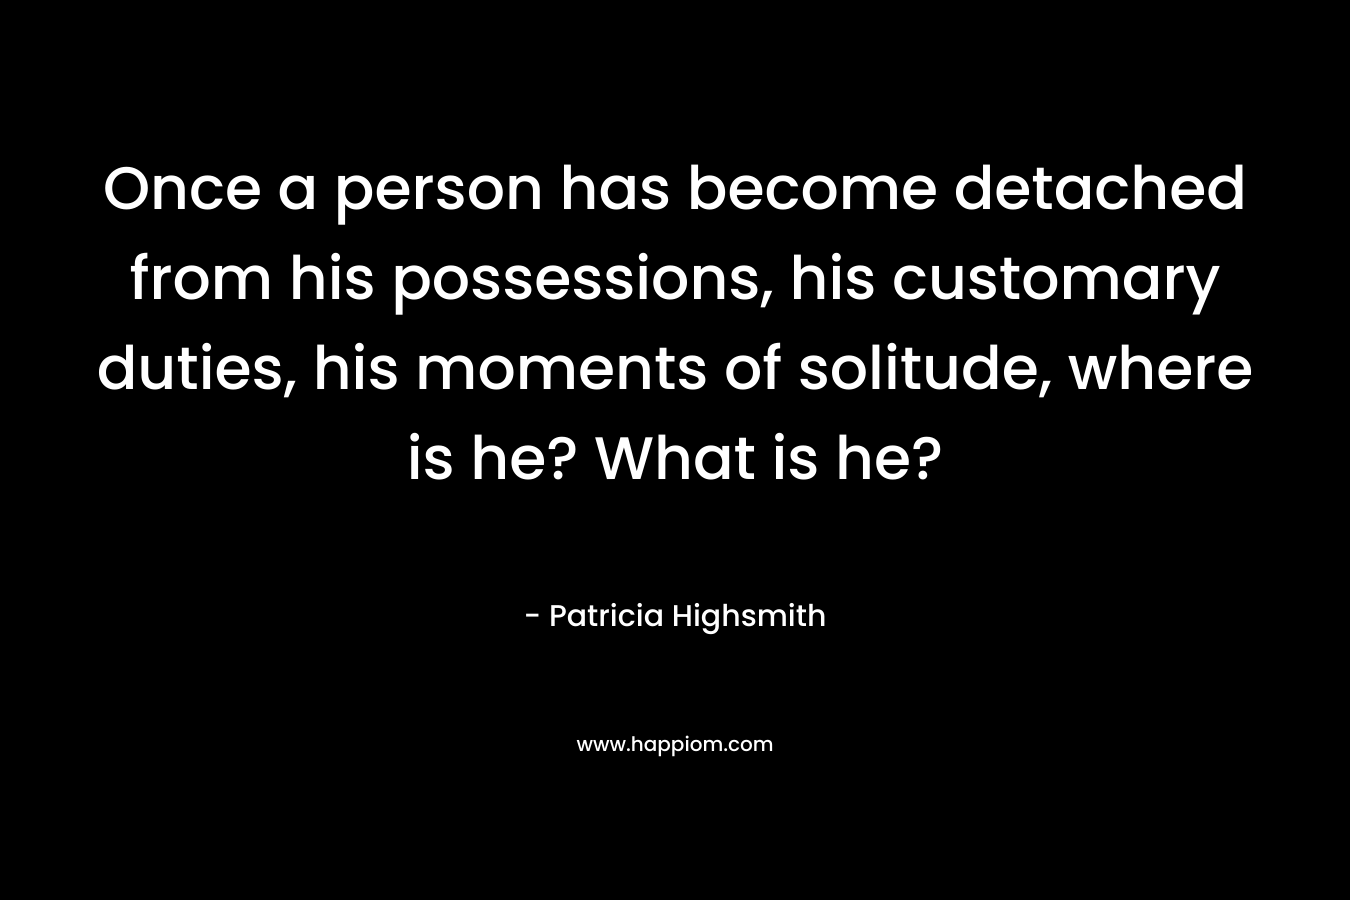 Once a person has become detached from his possessions, his customary duties, his moments of solitude, where is he? What is he? – Patricia Highsmith